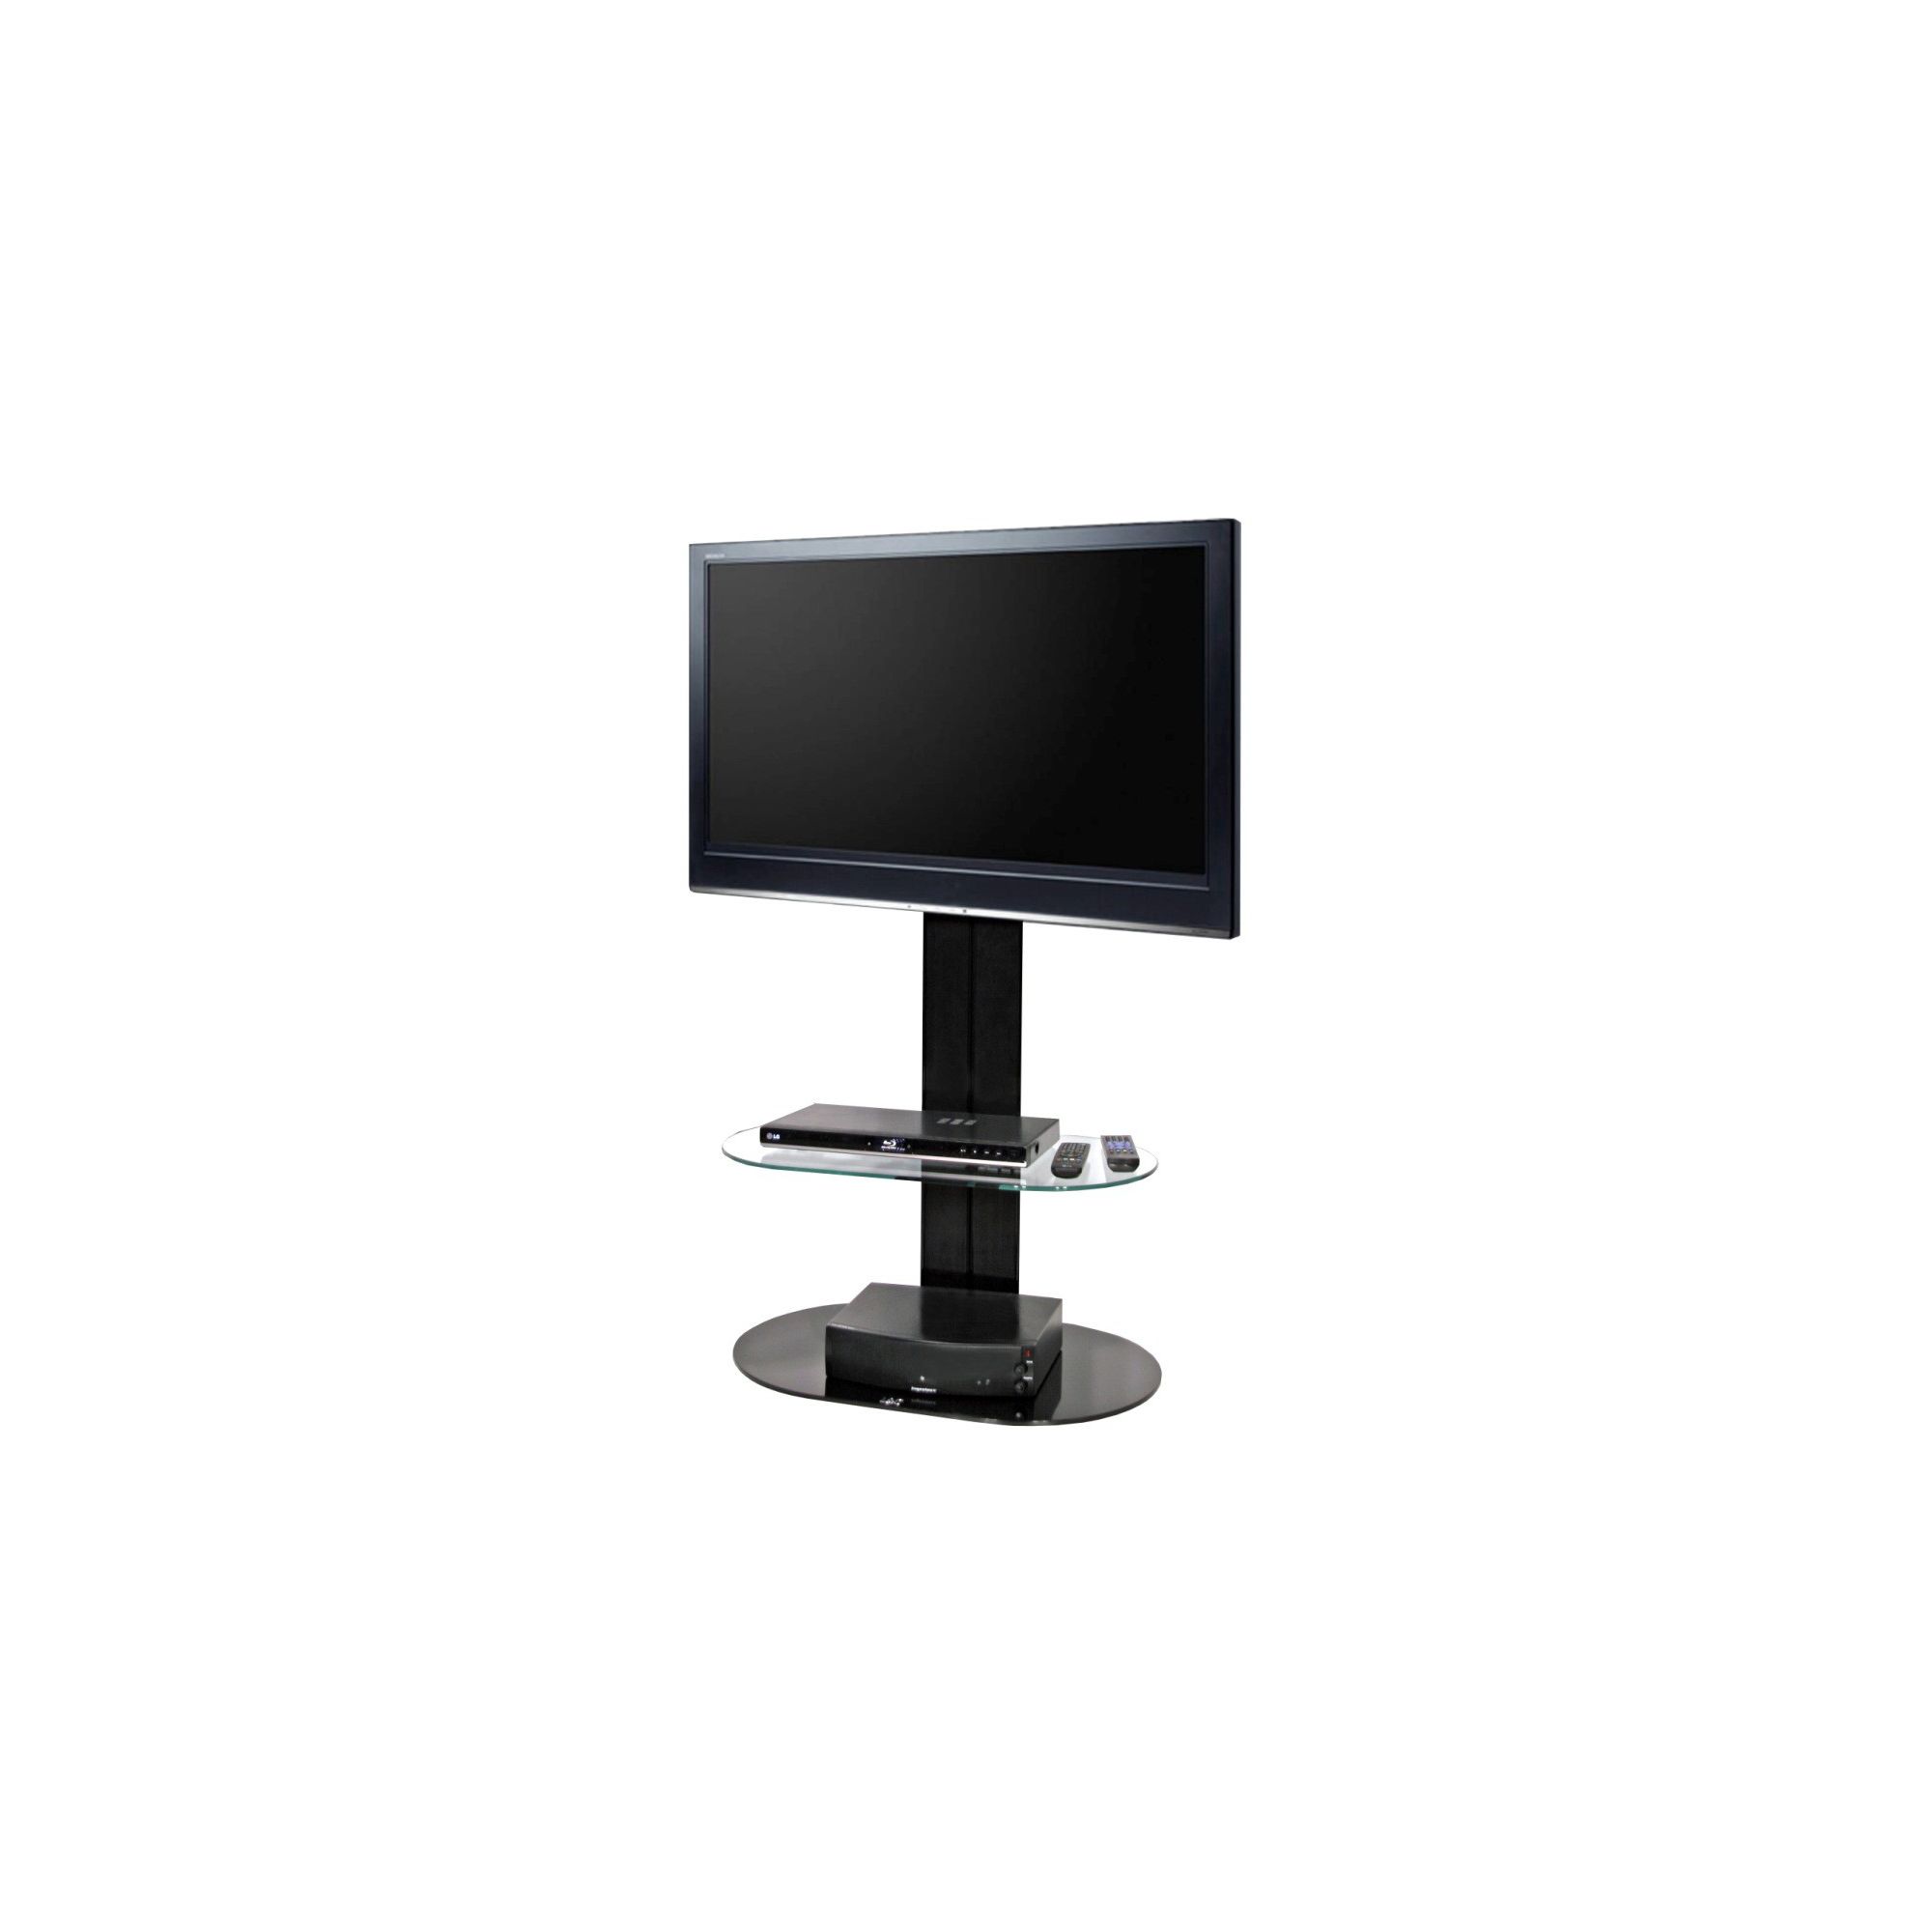 OMB Totem 1200 TV Stand - Black at Tesco Direct